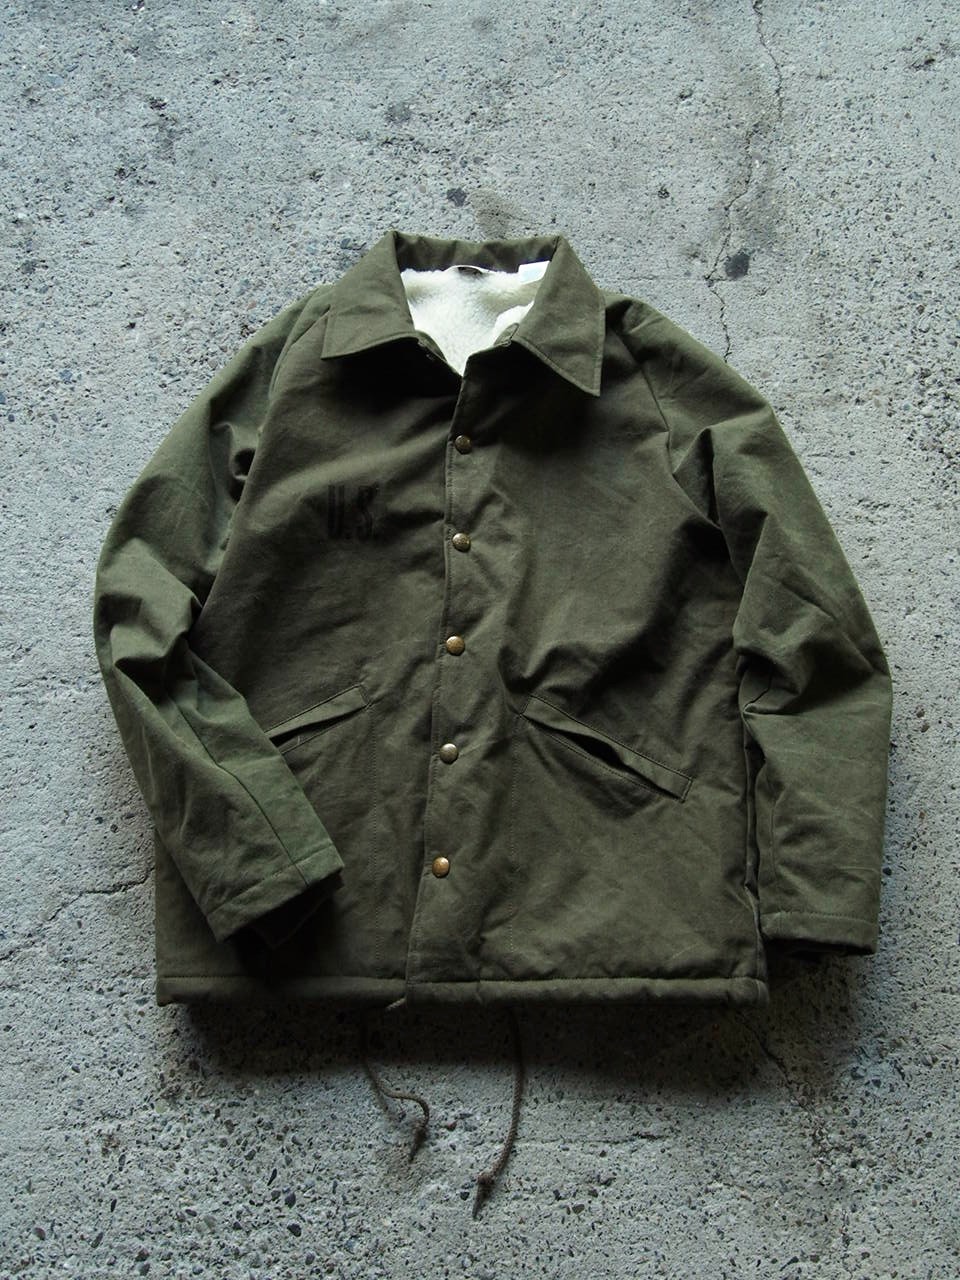 FIVE BROTHERの名品!!! : JIMS STORE & JIMS City BLOG